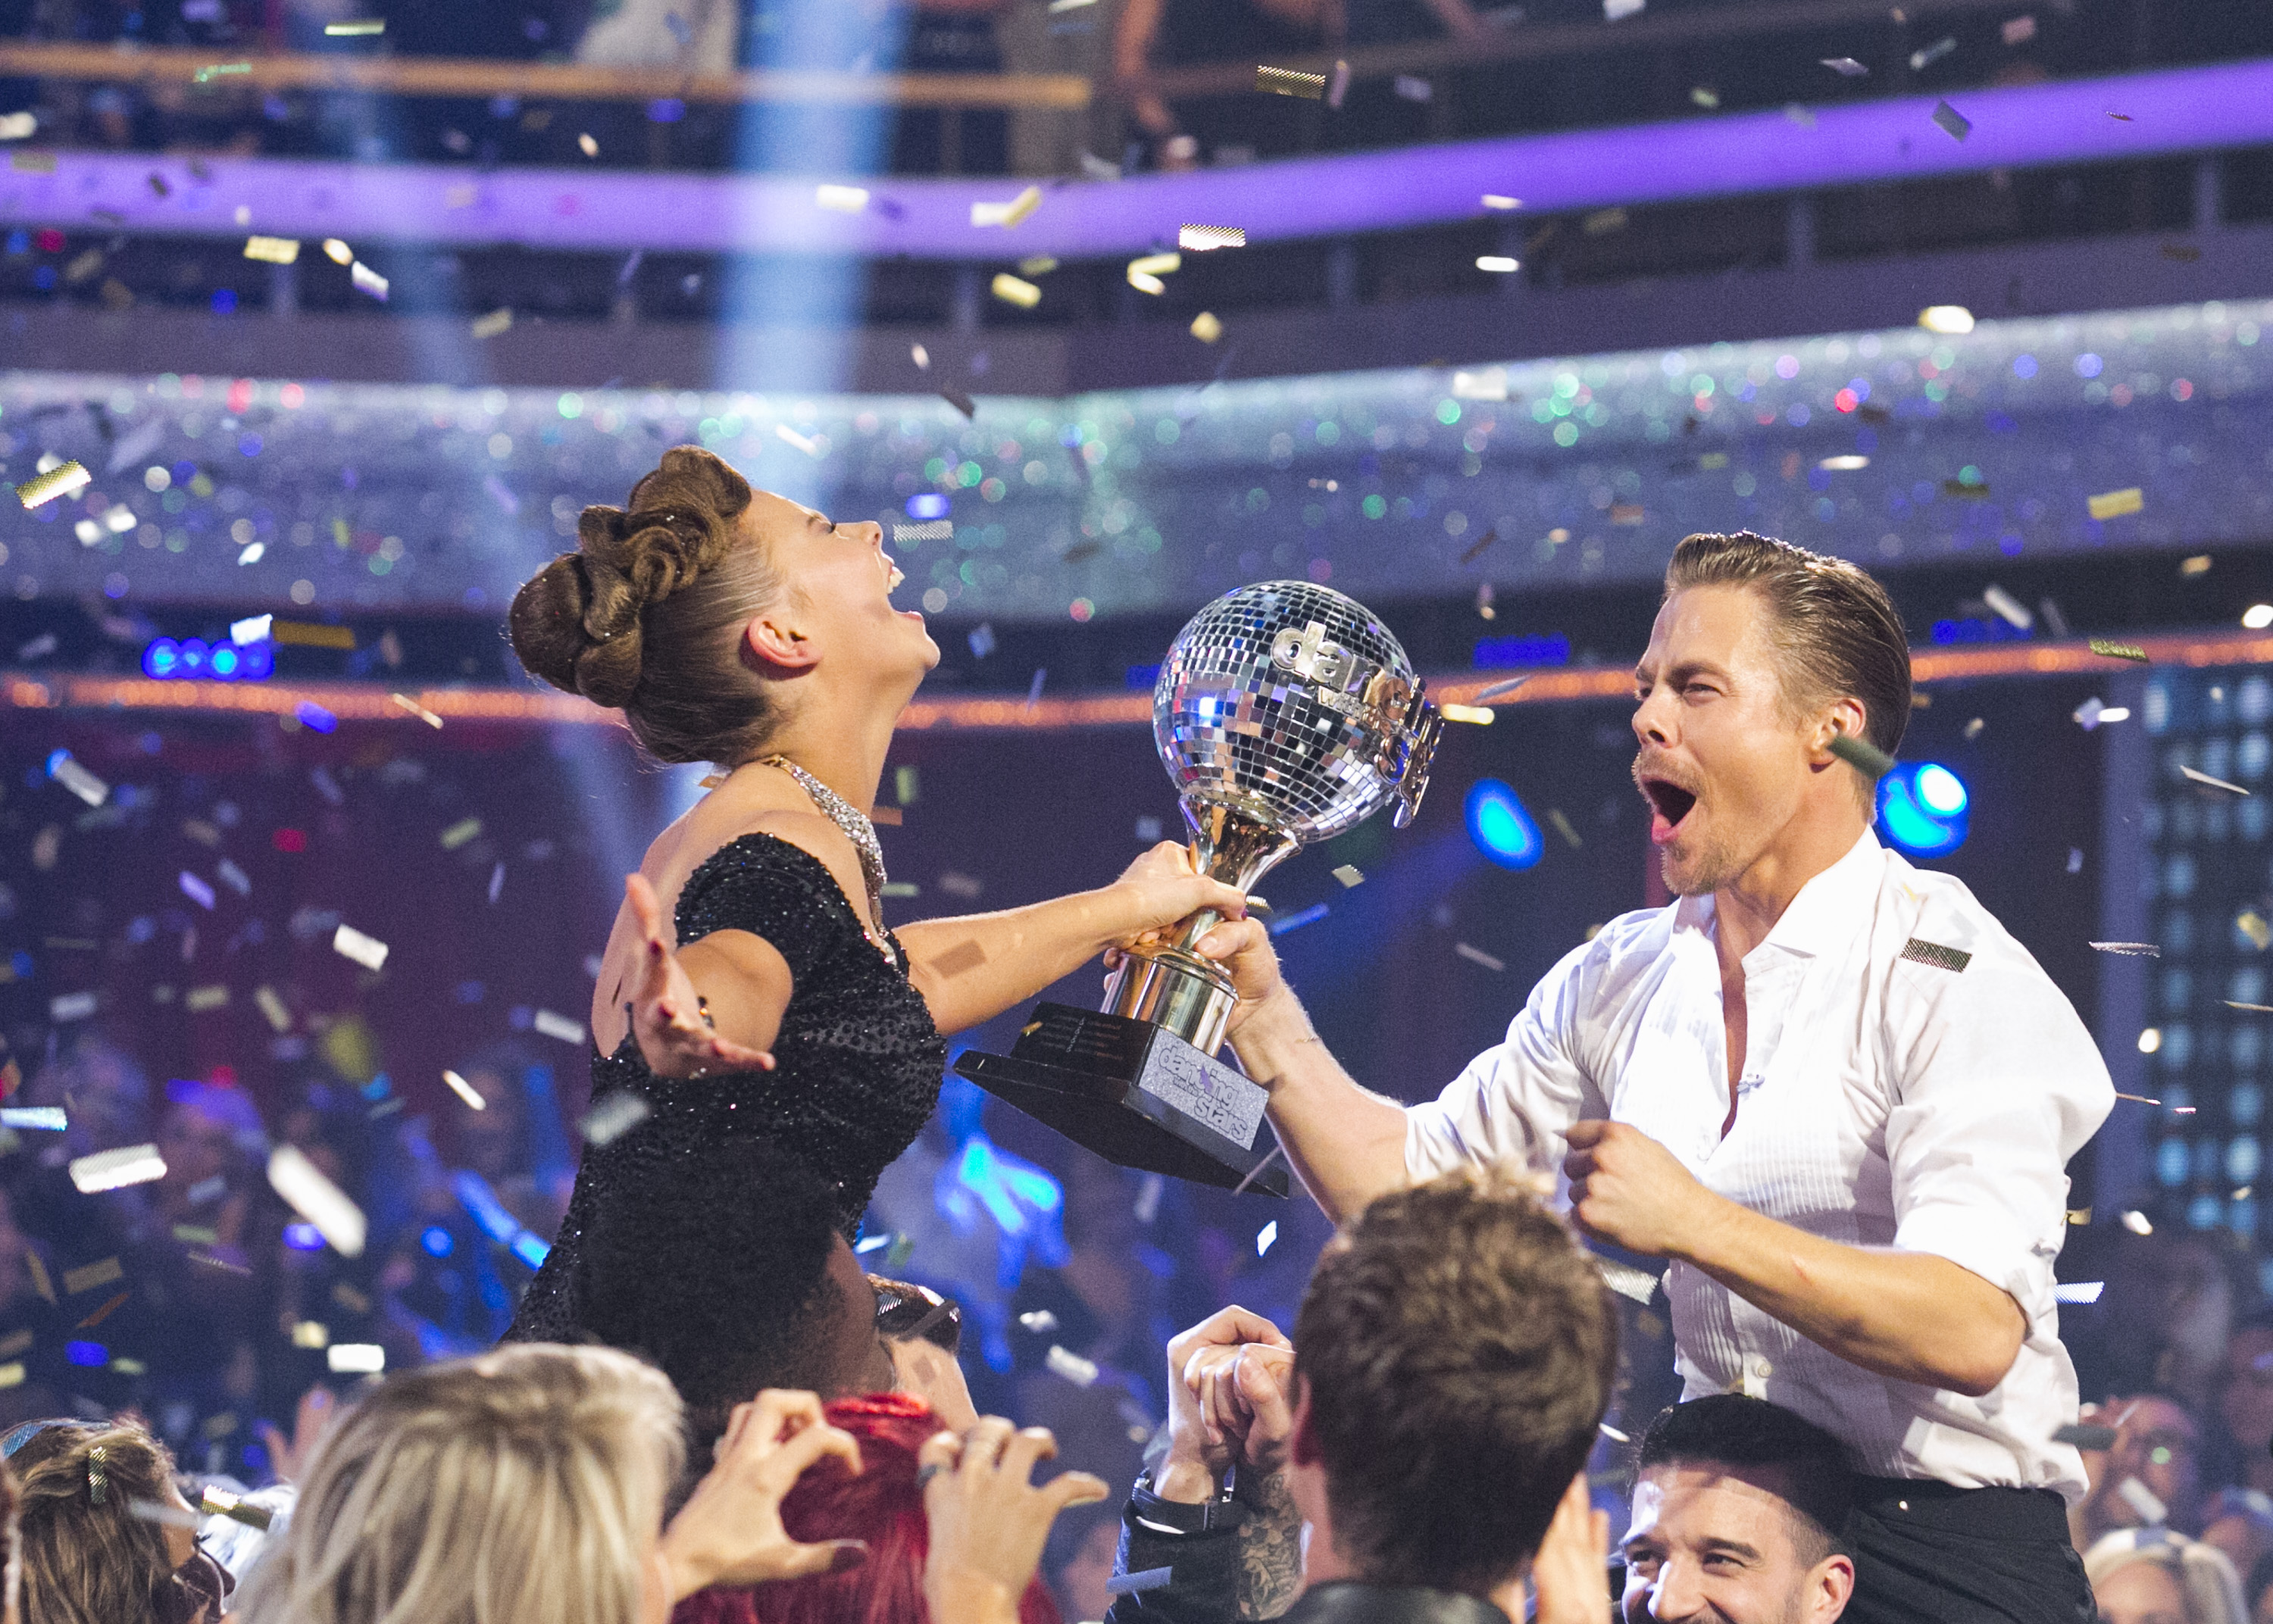 'Dancing With the Stars' How Many Mirrorball Trophies Has Derek Hough Won?